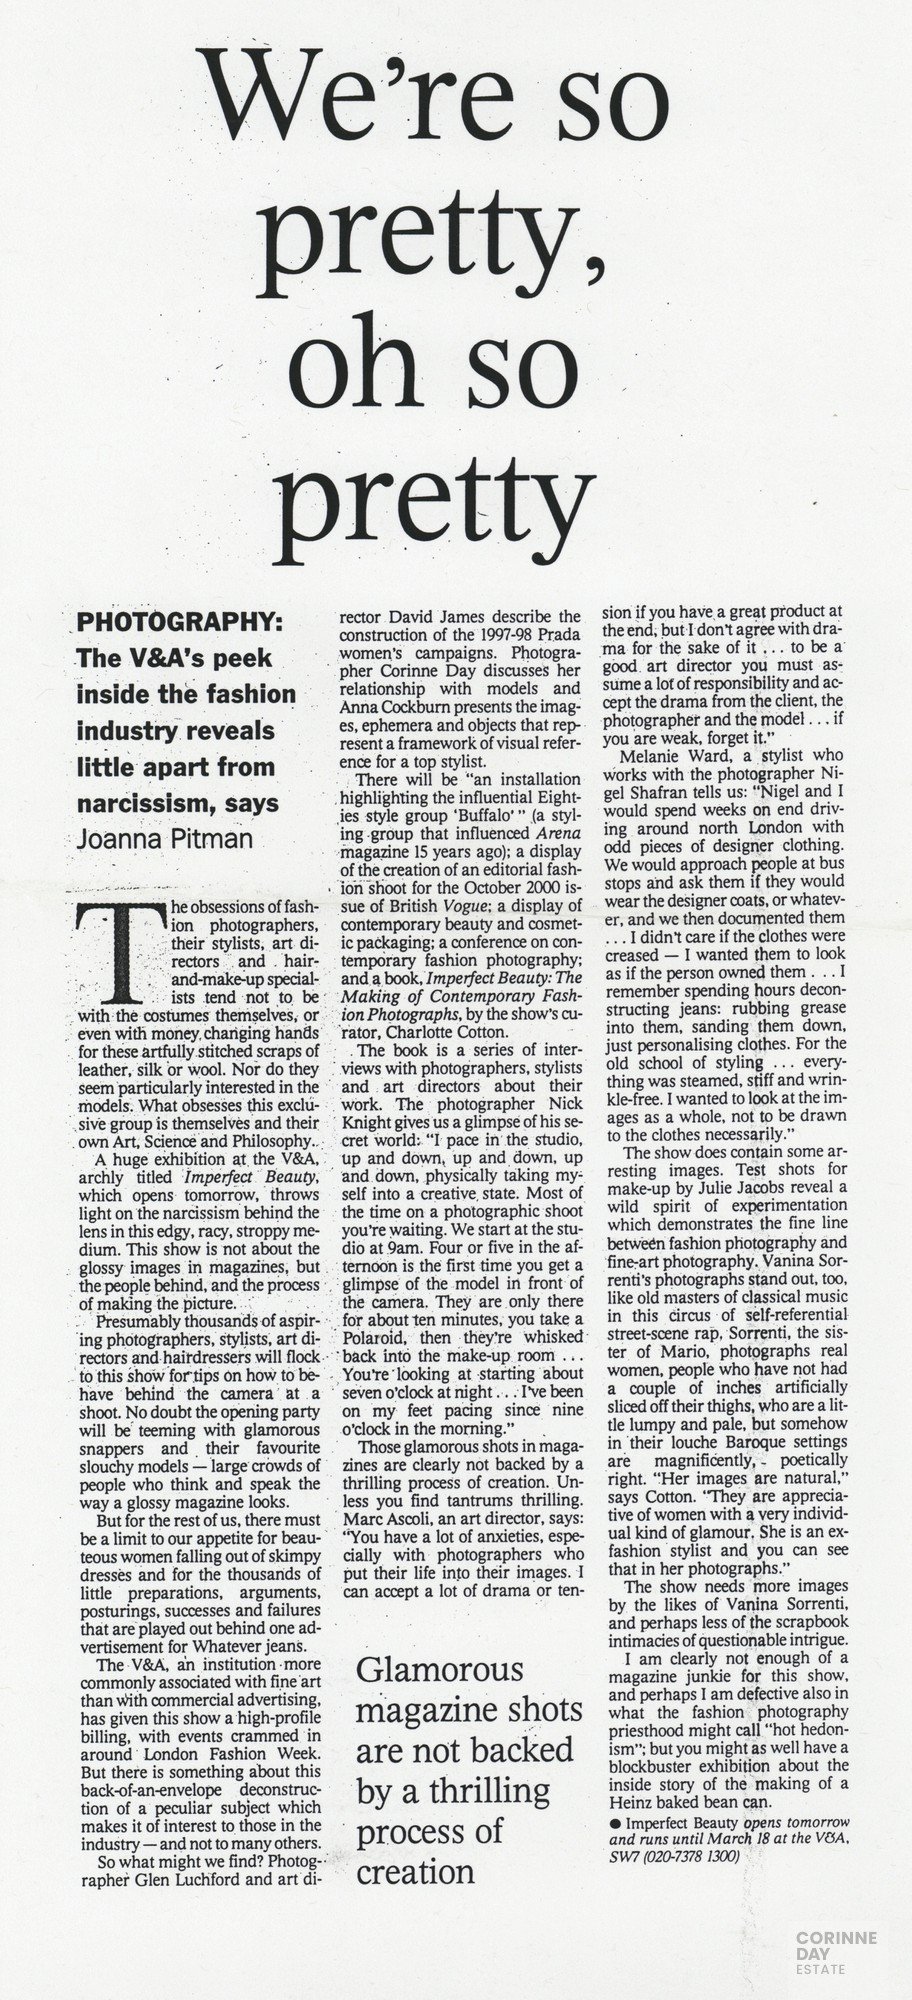 We're so pretty. Oh so pretty., The Times Times 2, Sep 2000 — Image 1 of 1